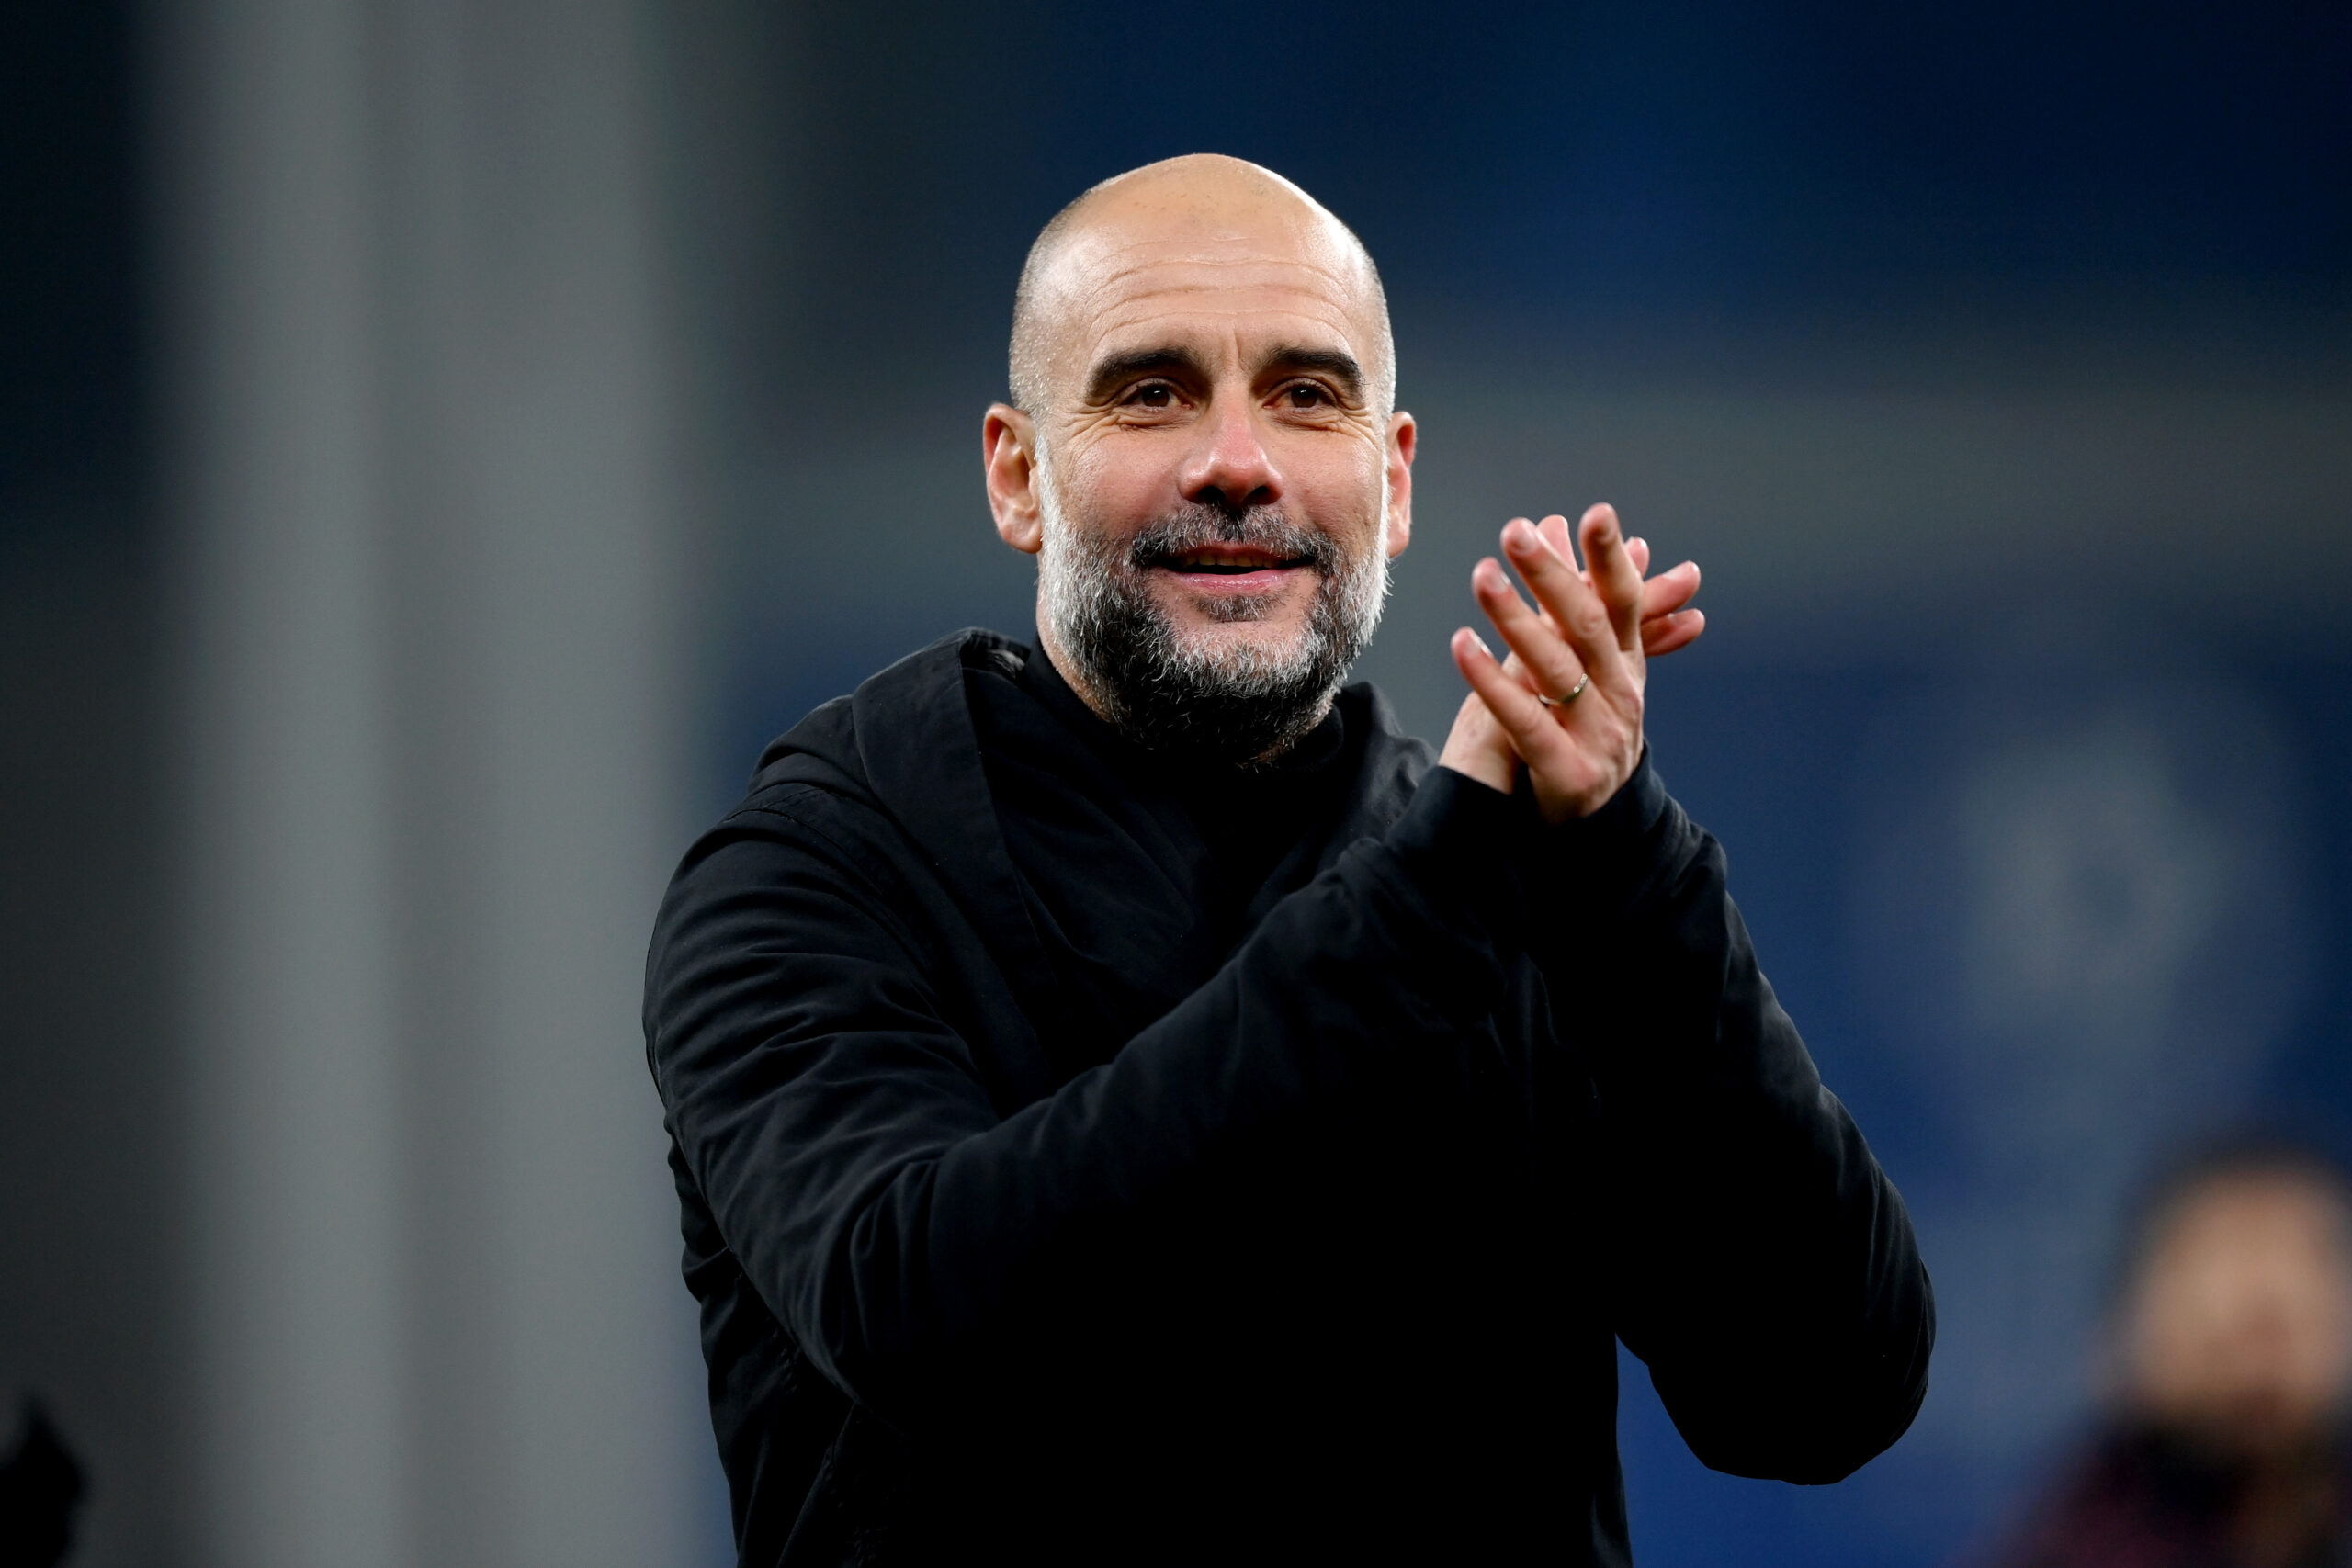 COPENHAGEN, DENMARK - FEBRUARY 13: Pep Guardiola, Manager of Manchester City, applauds the fans at full-time following the team's victory in the UEFA Champions League 2023/24 round of 16 first leg match between F.C. Copenhagen and Manchester City at Parken Stadium on February 13, 2024 in Copenhagen, Denmark.